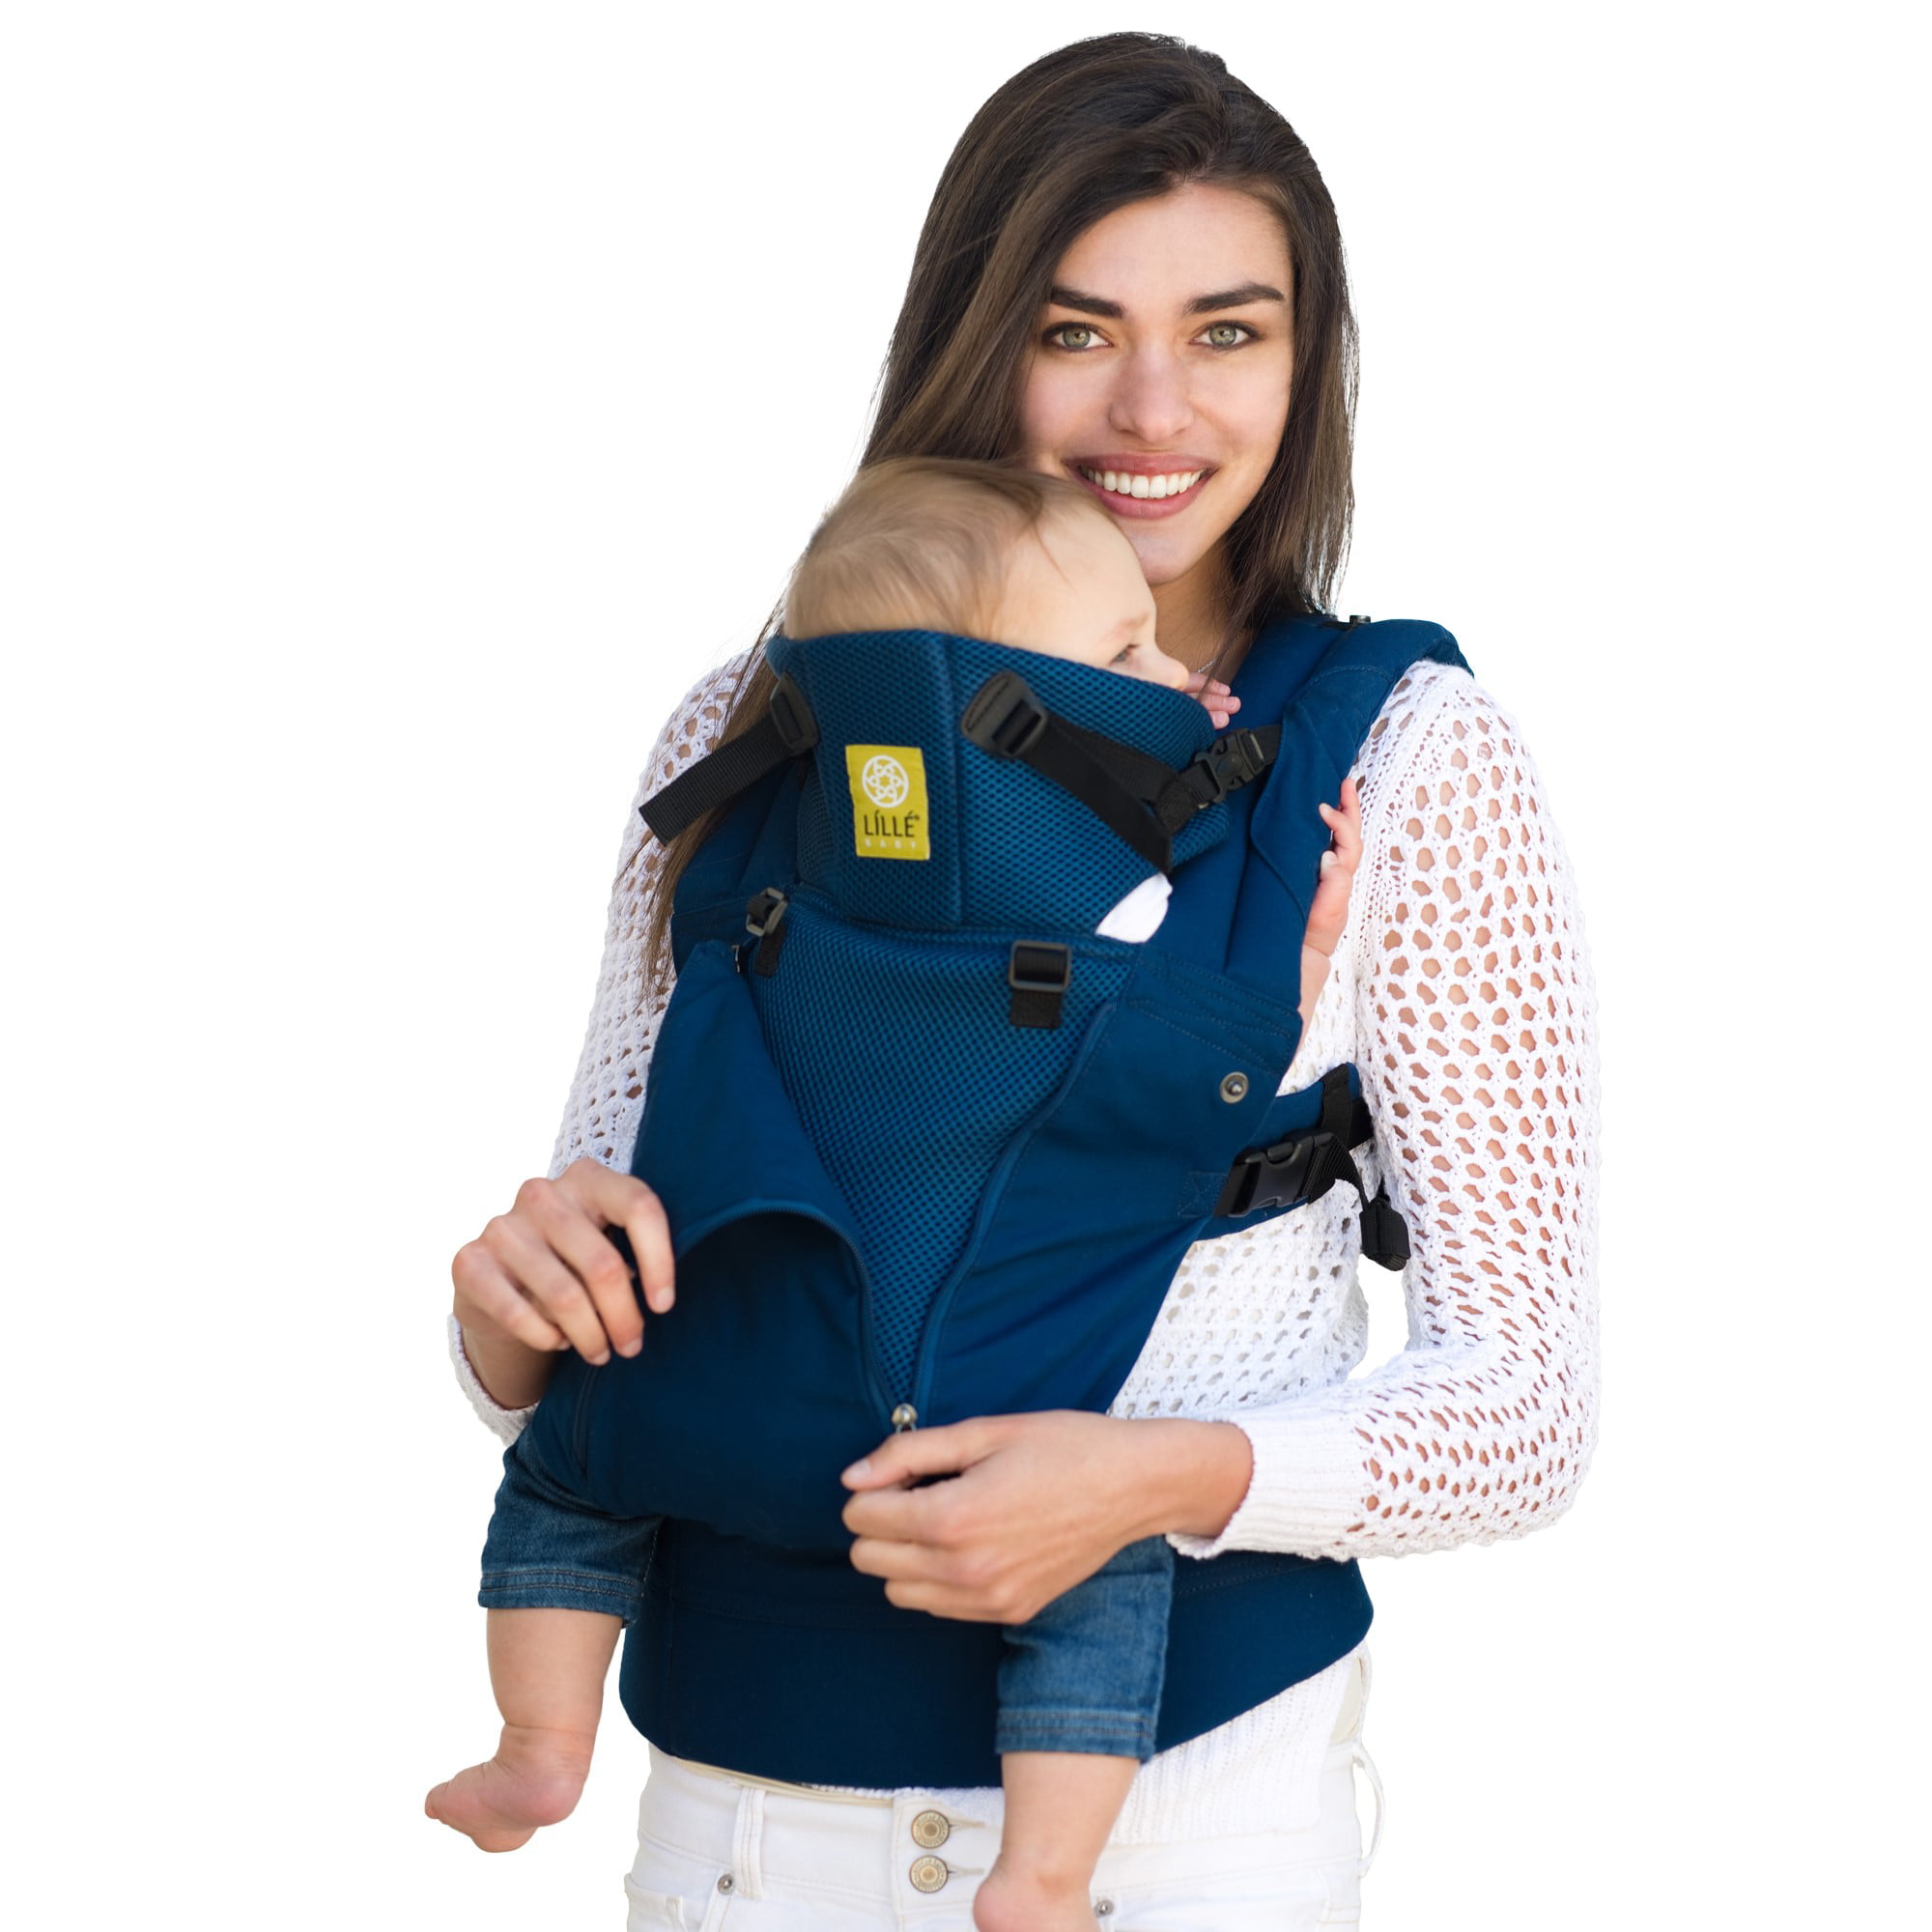 where to buy lillebaby carriers